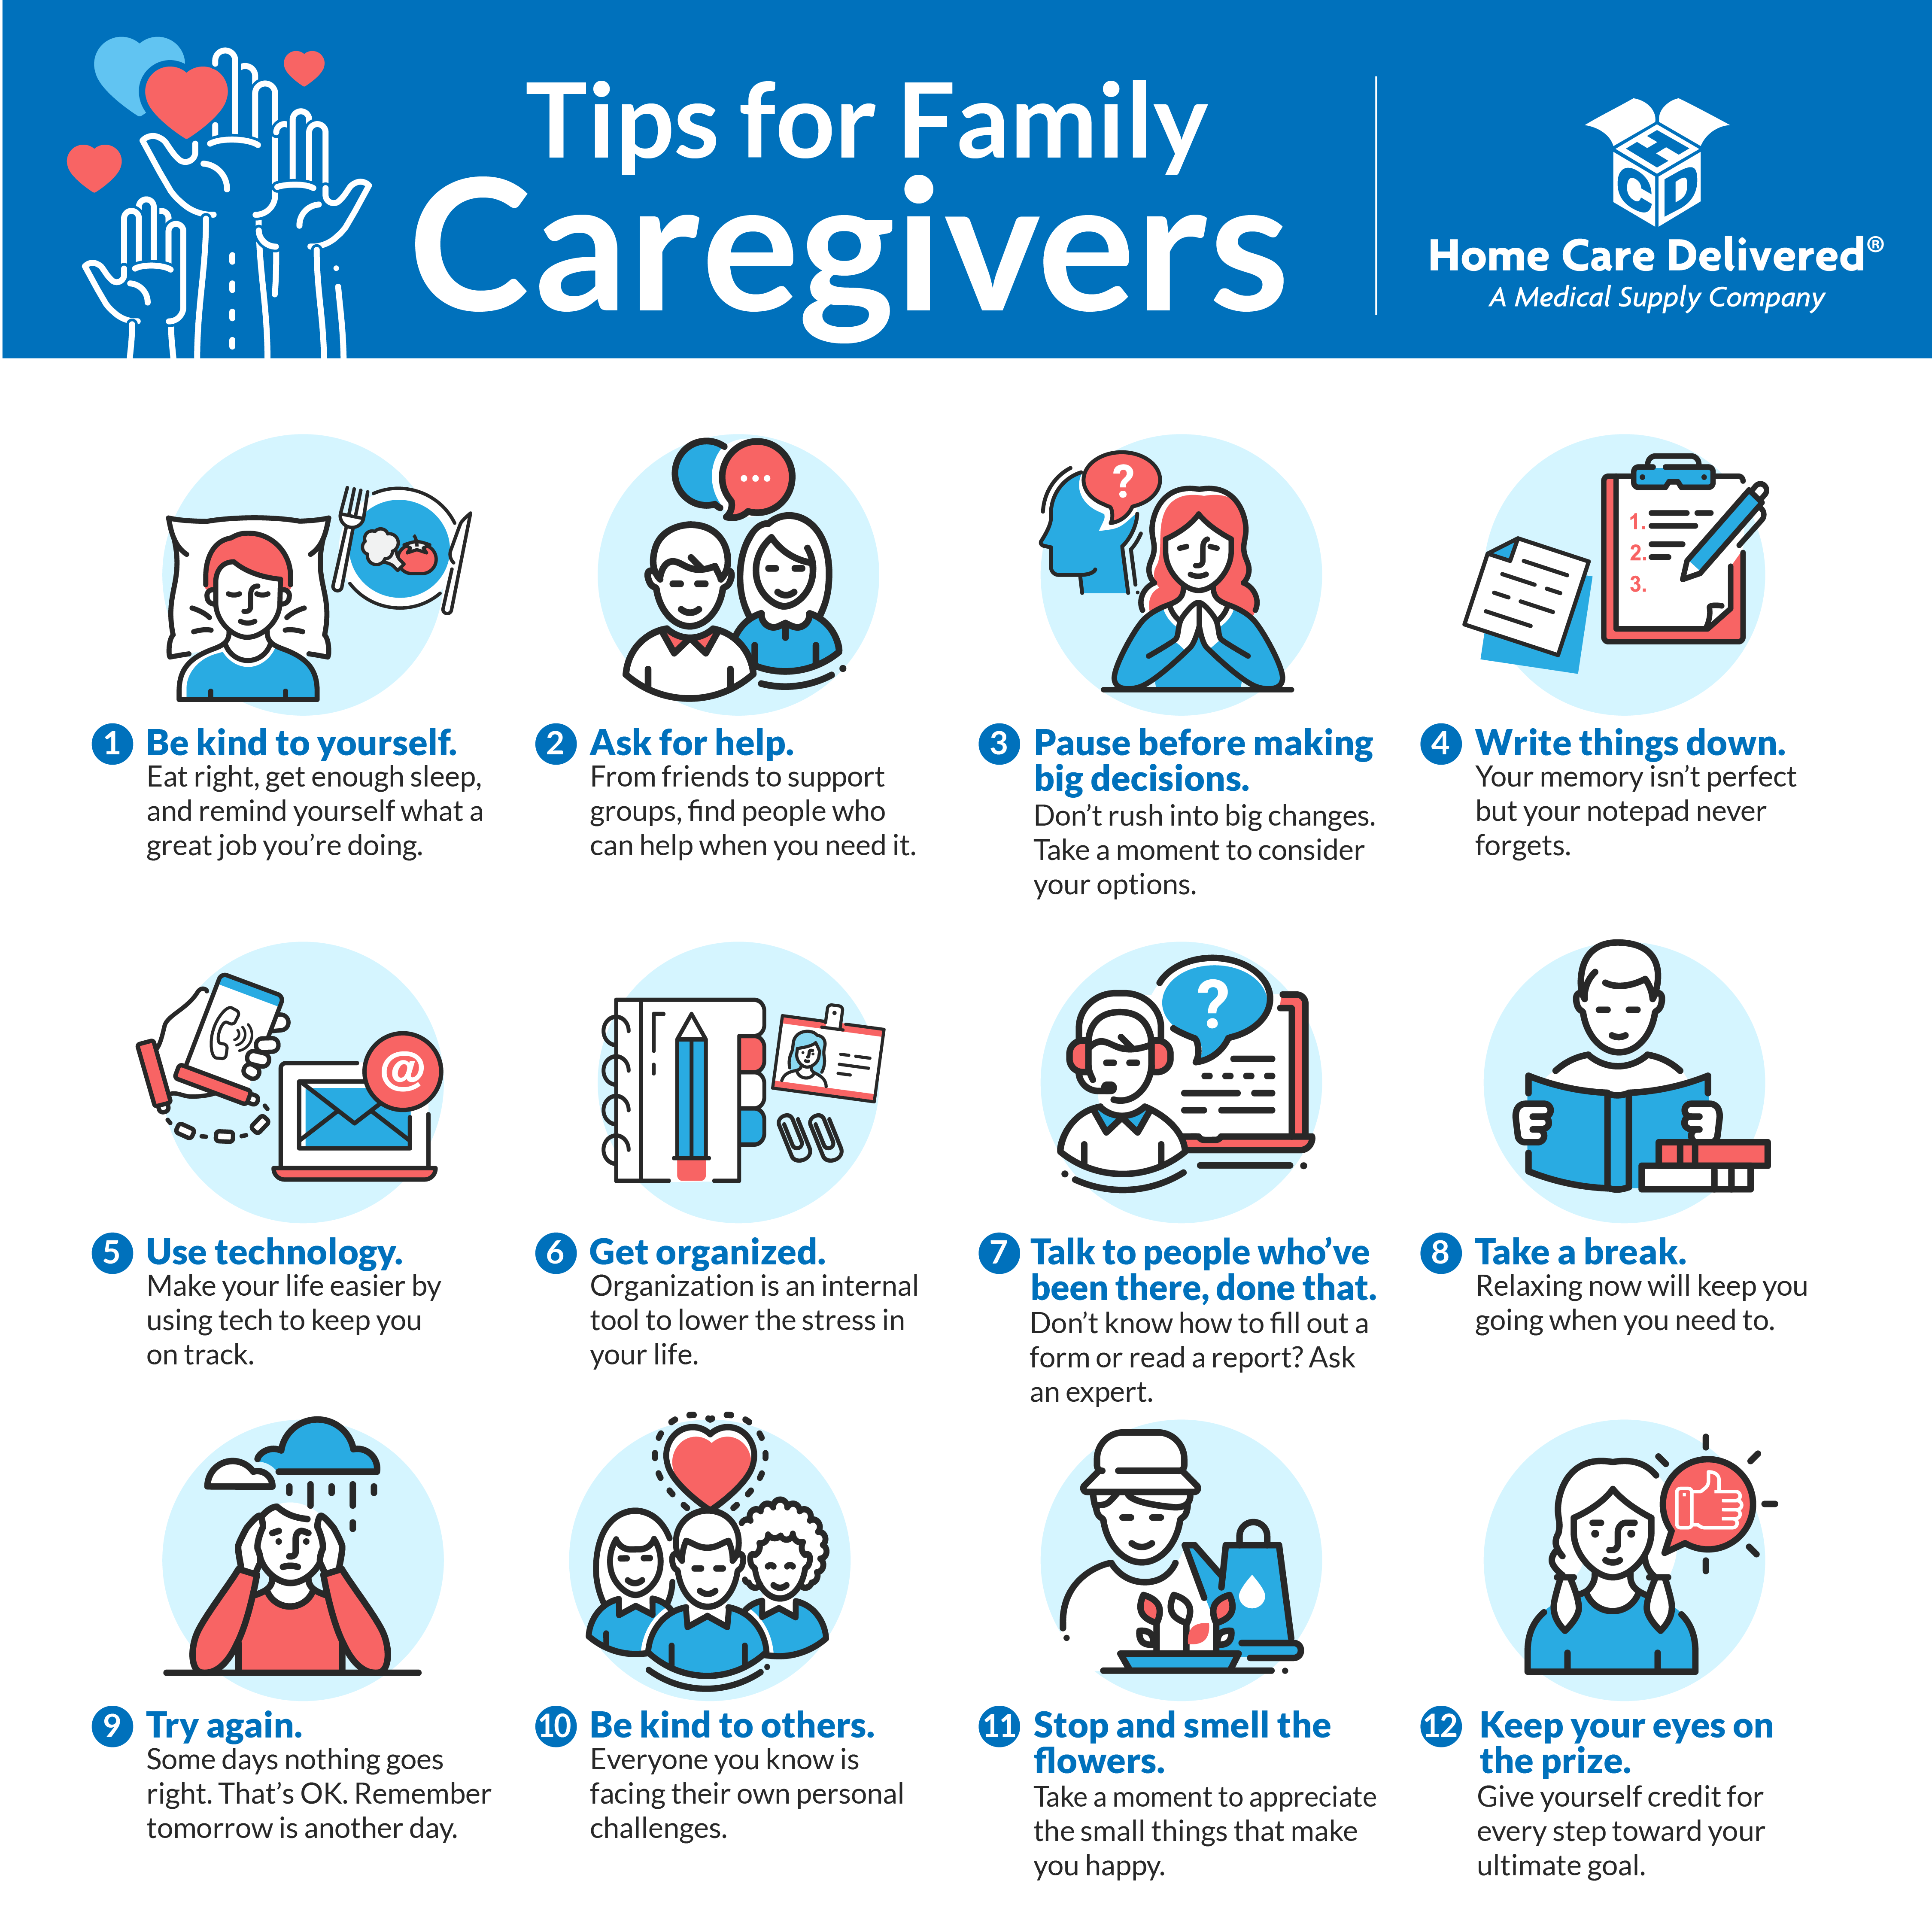 Tips for Family Caregivers